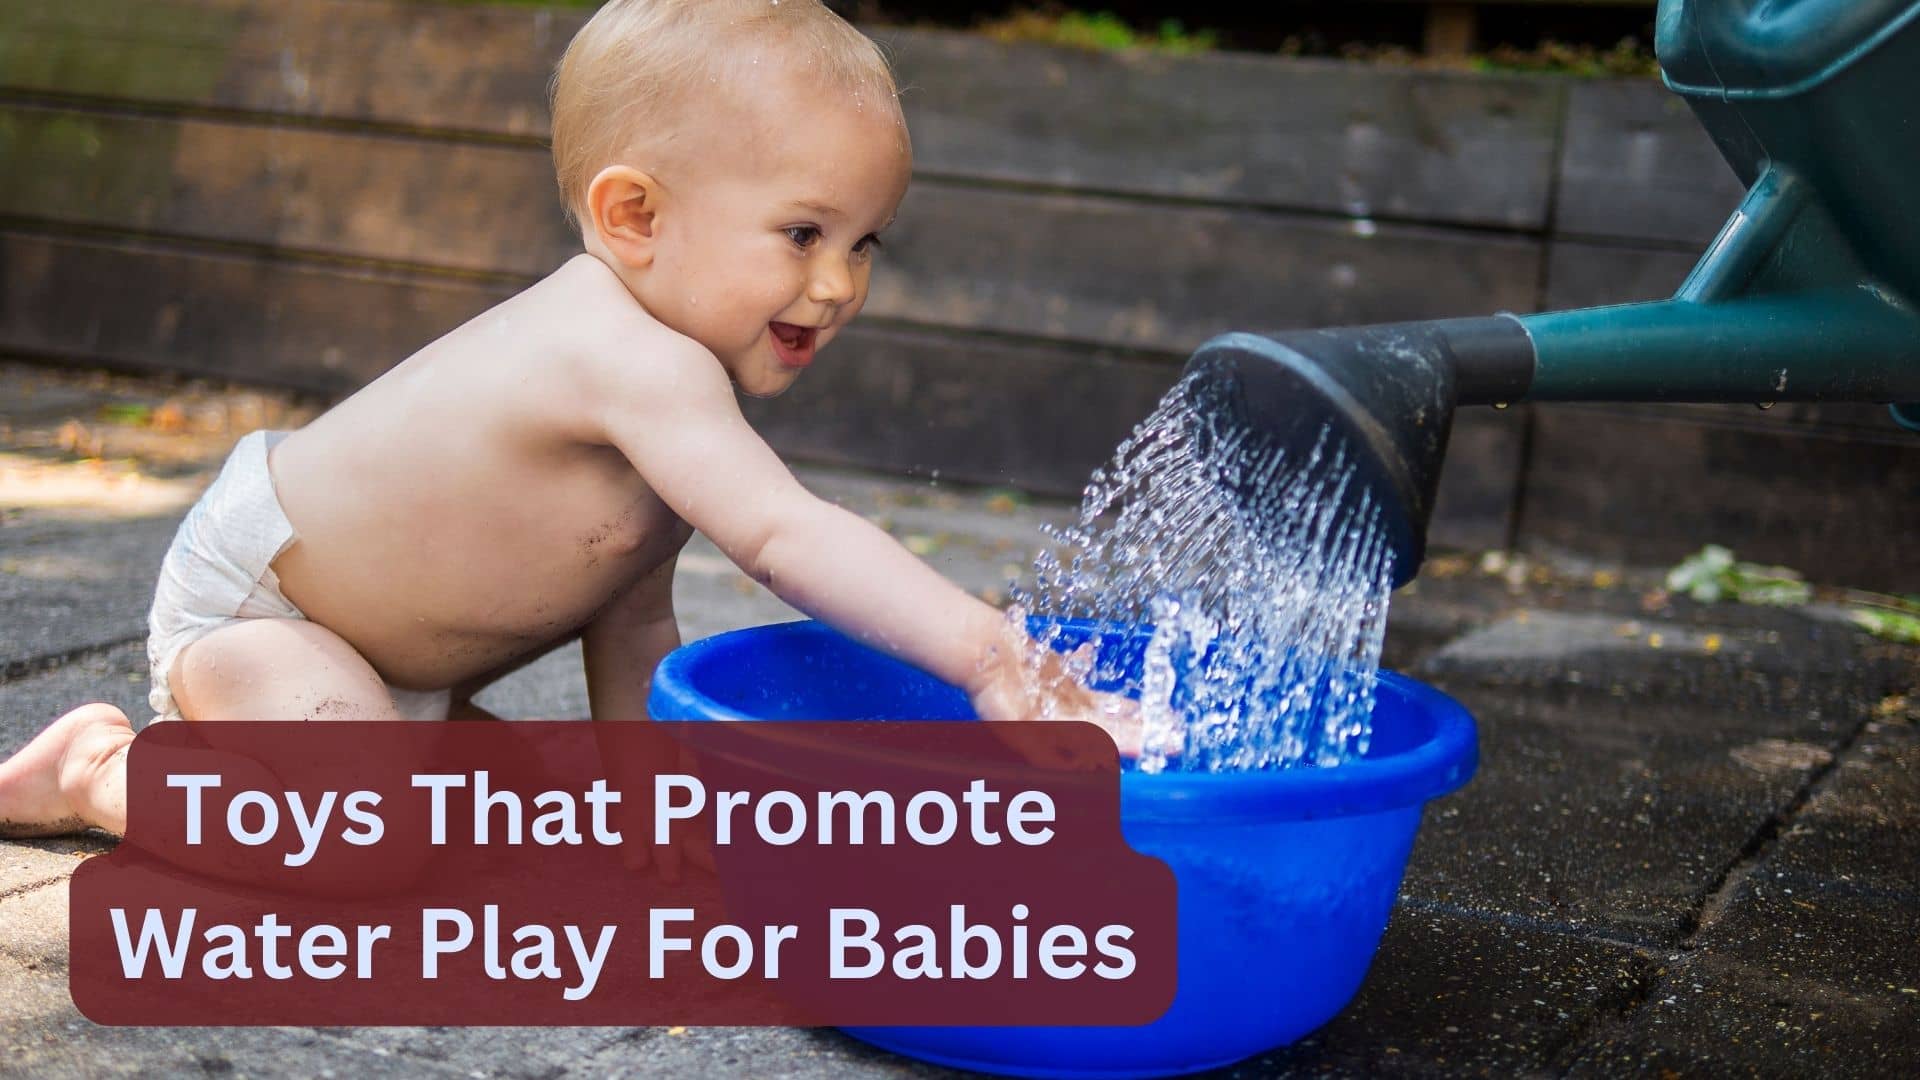 What Are Some Toys That Promote Water Play For Babies?